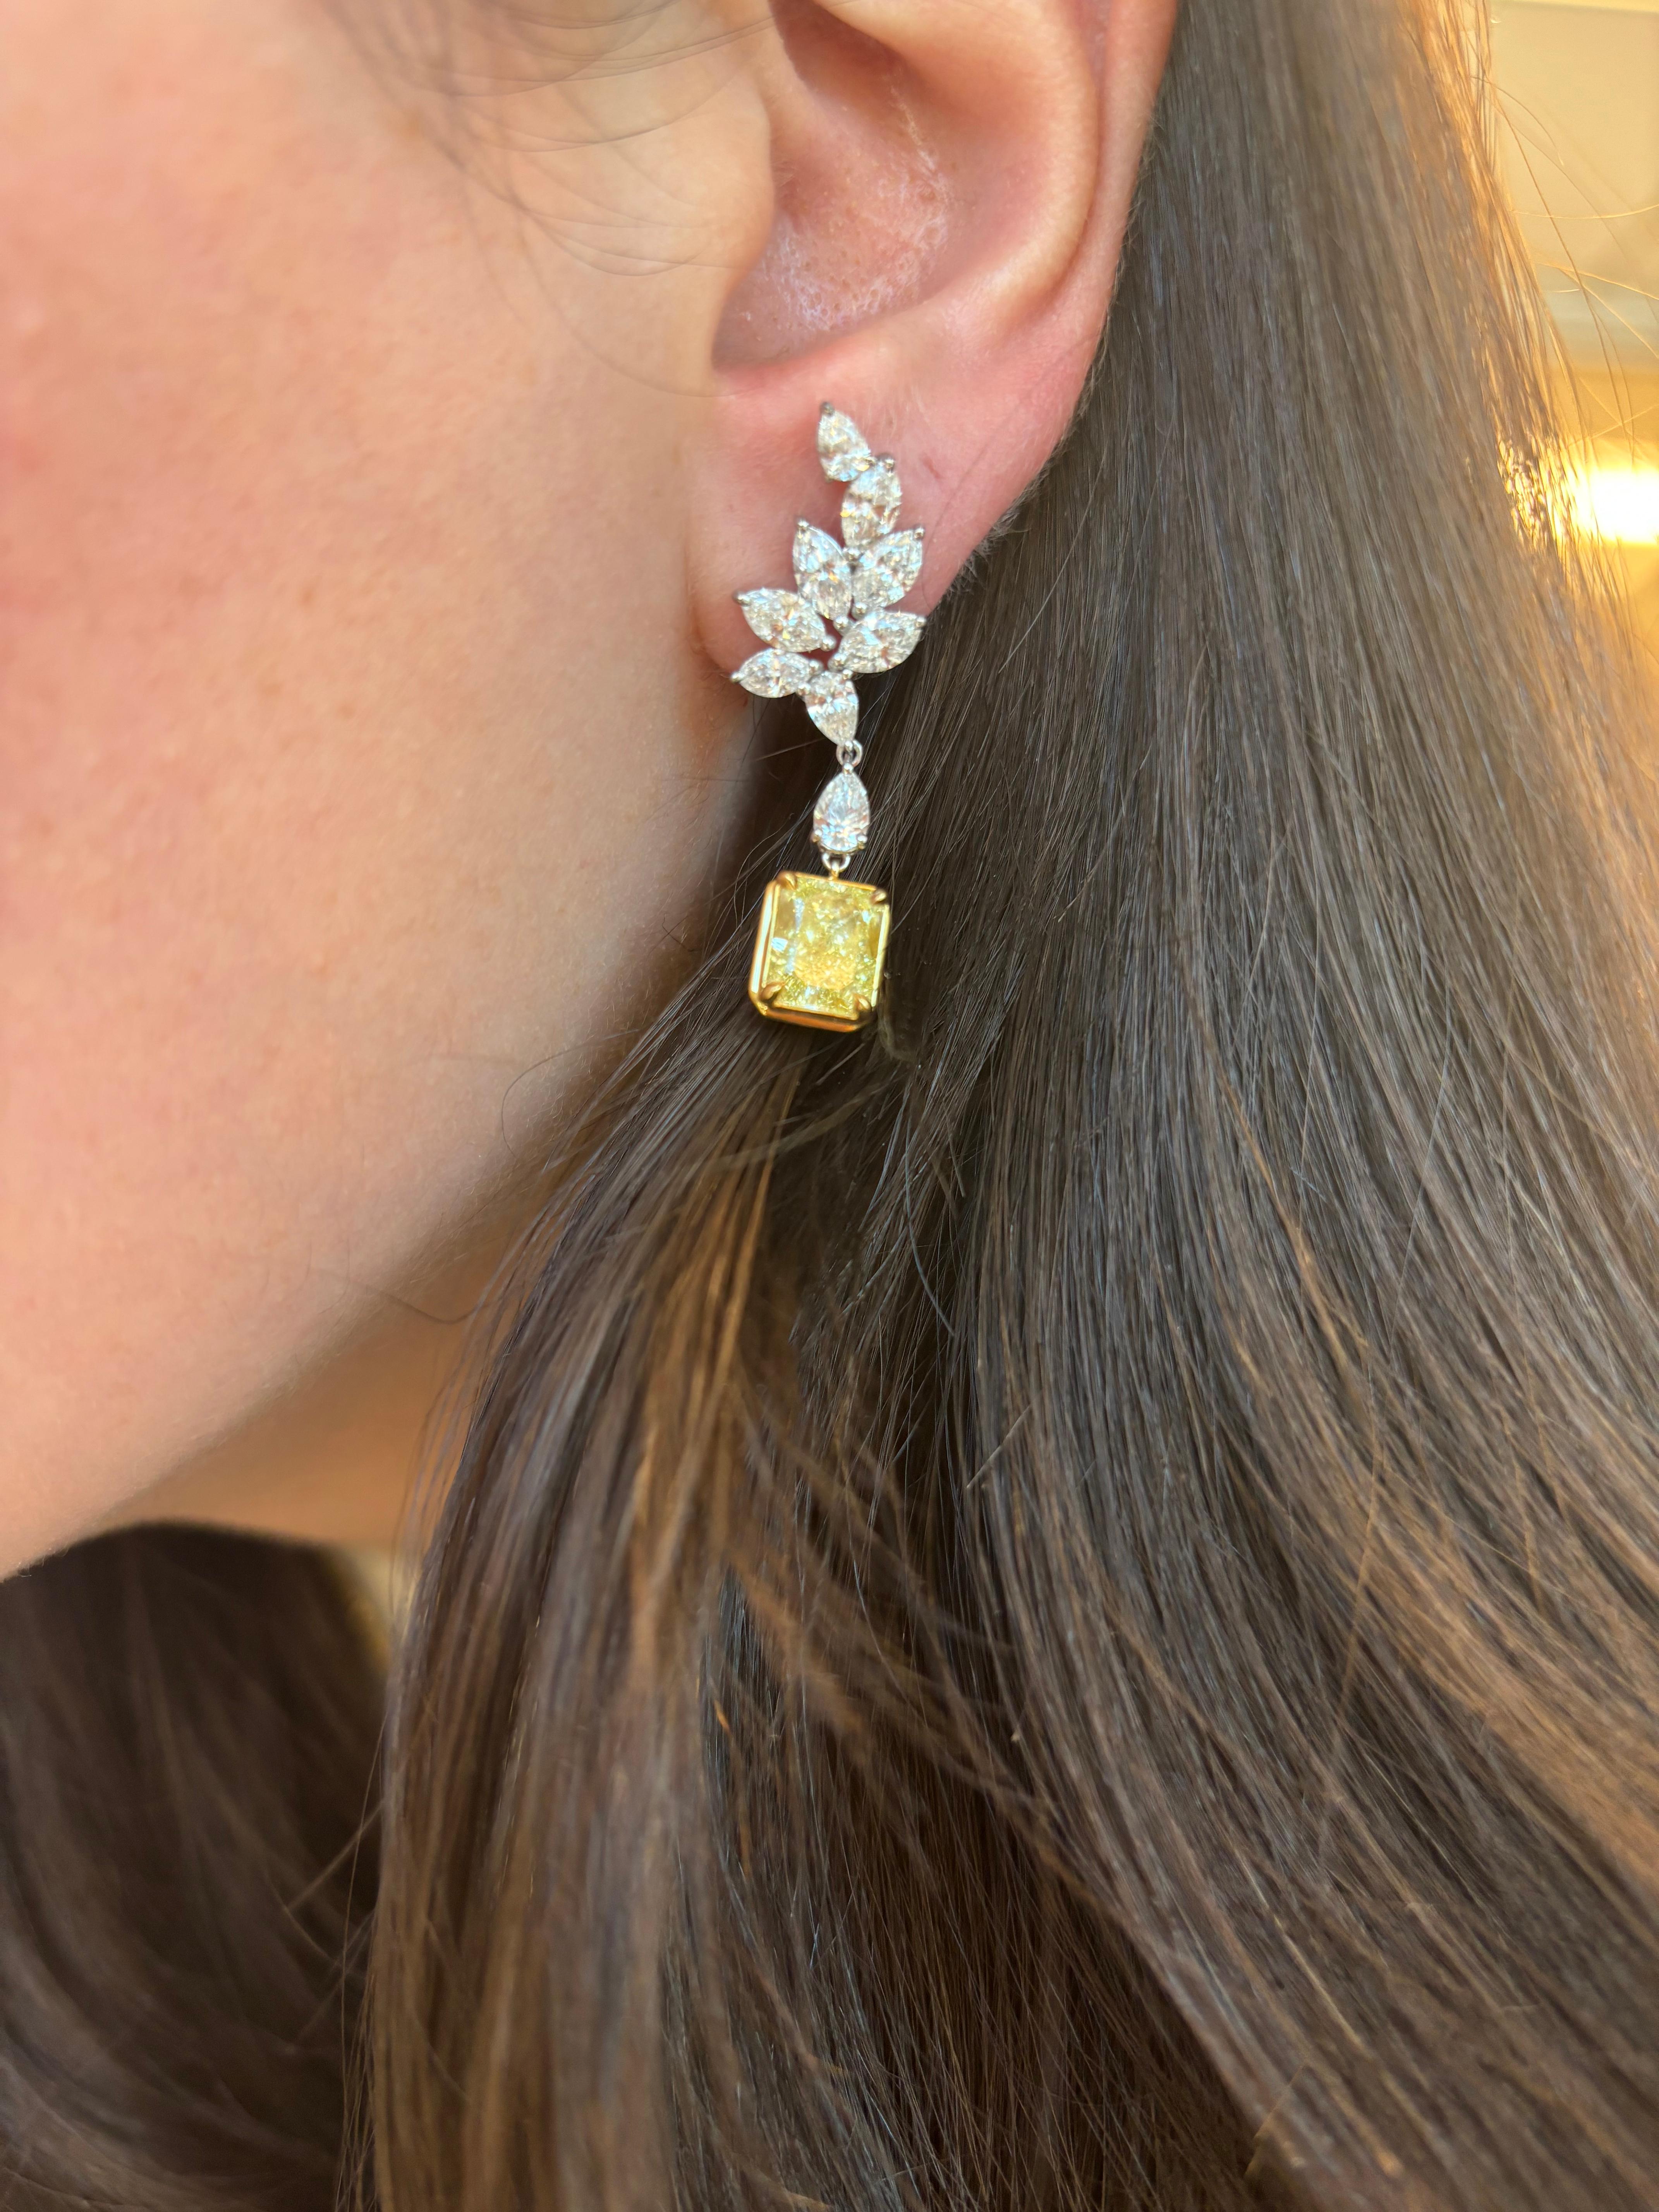 Stunning fancy yellow diamonds (that look fancy intense) with halo earrings, GIA certified. High jewelry by Alexander Beverly Hills. 
8.40 carats total diamond weight. 
*Center stones look Fancy Intense Yellow in the mounting 
2 radiant cut